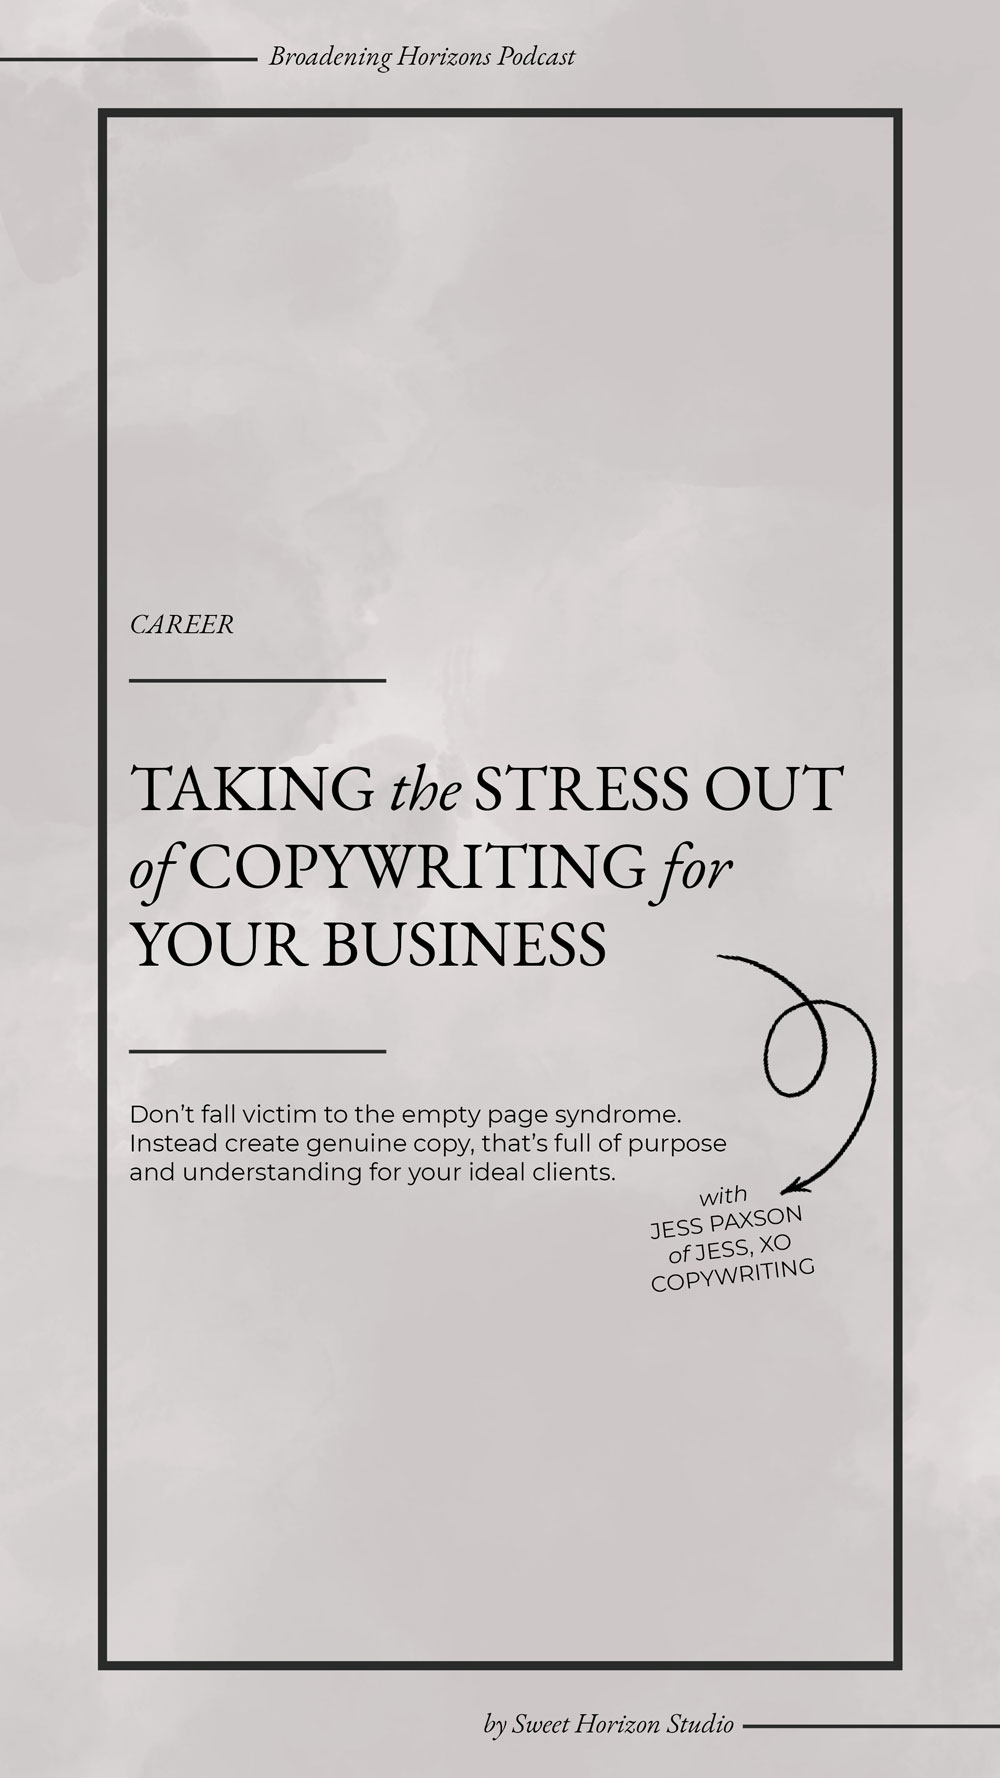 Taking the Stress Out of Copywriting for Your Business with Jess, XO Copywriting from www.sweethorizonblog.com